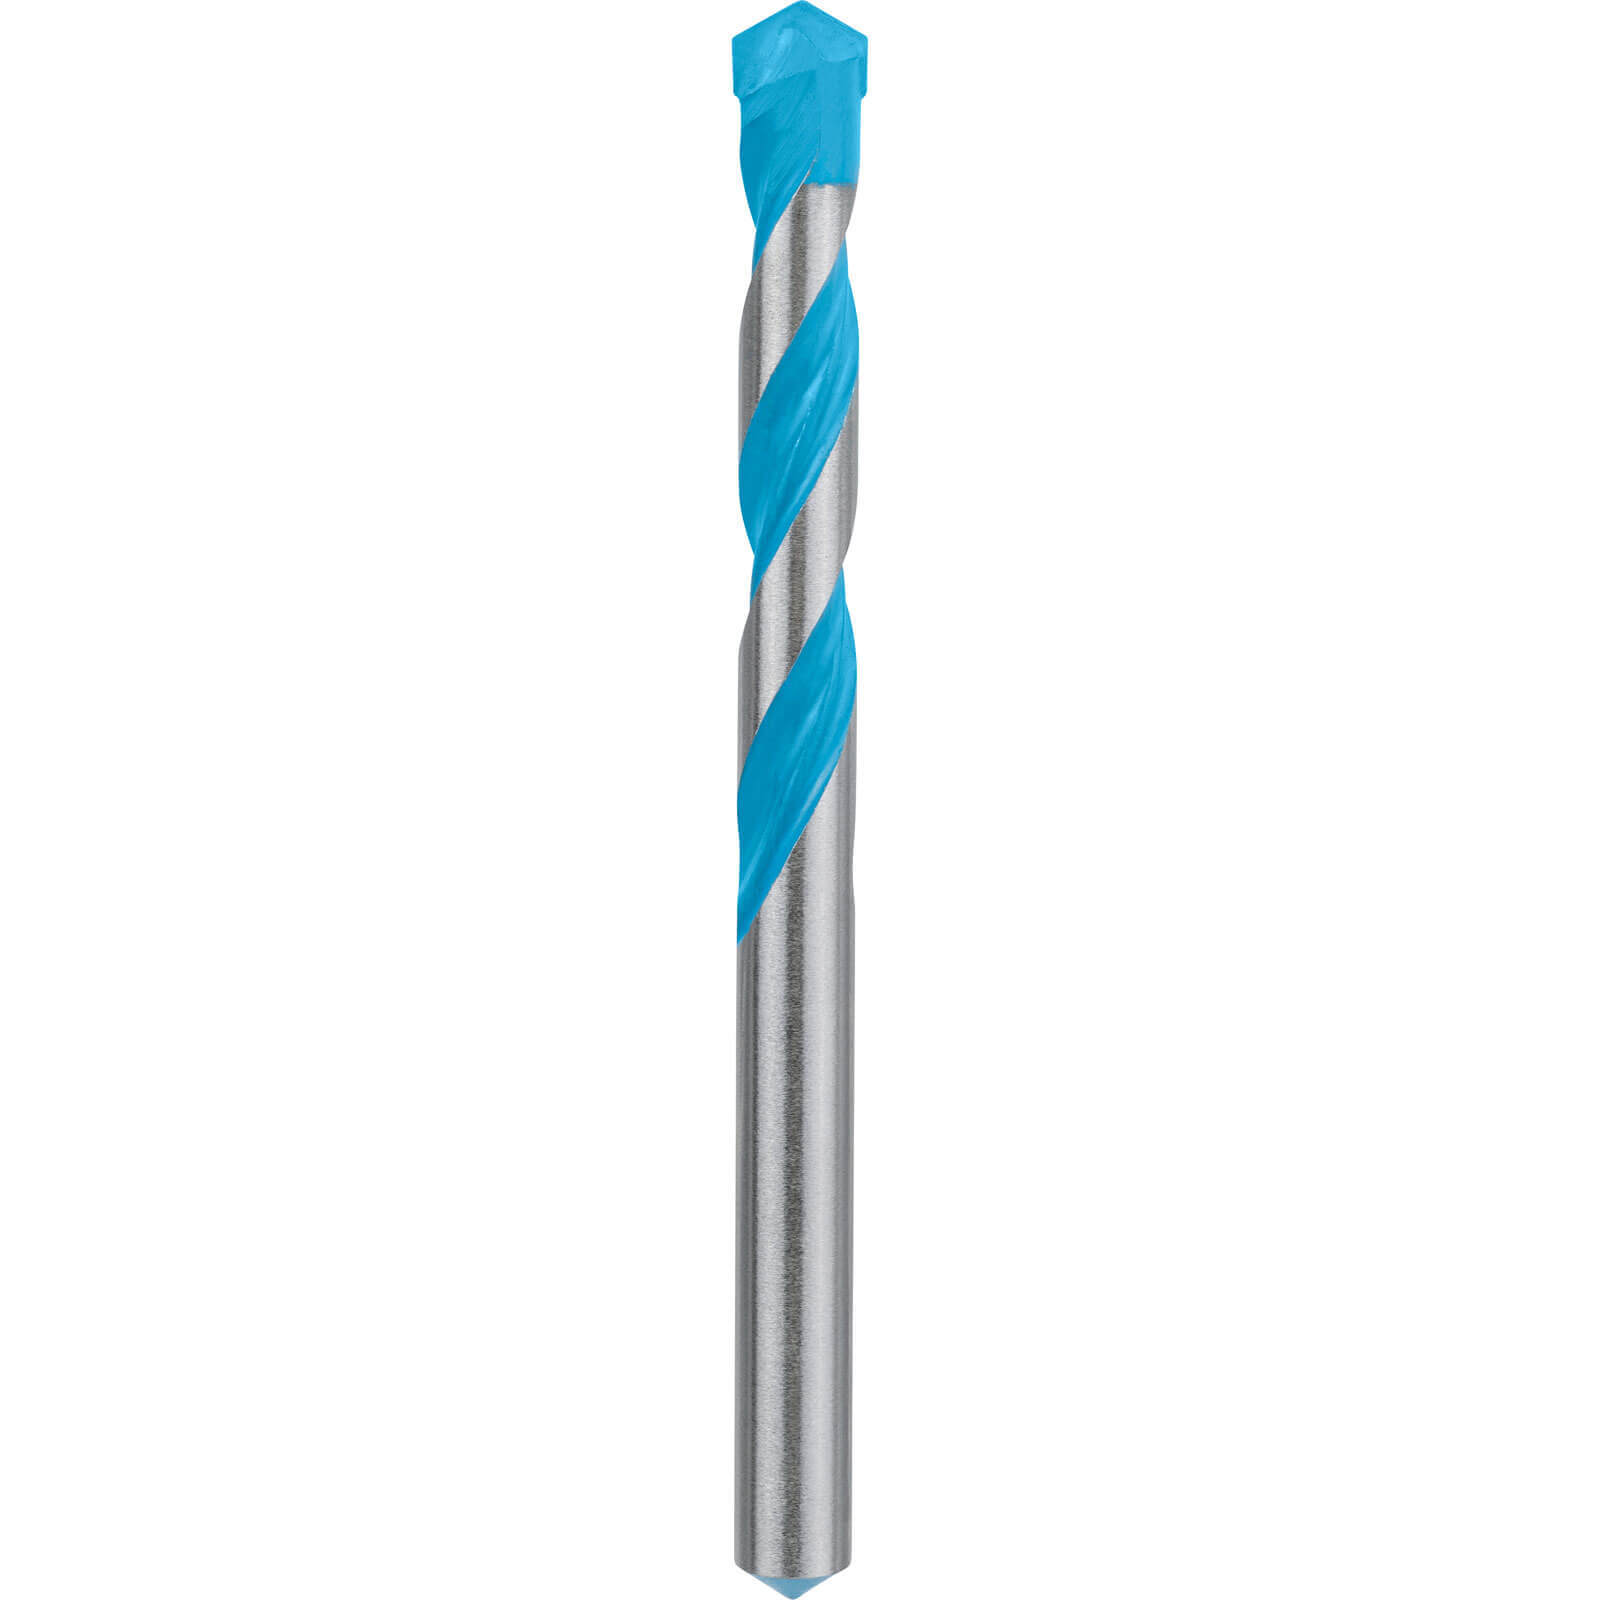 Image of Bosch Expert CYL-9 Multi Construction Drill Bit 10mm 120mm Pack of 1